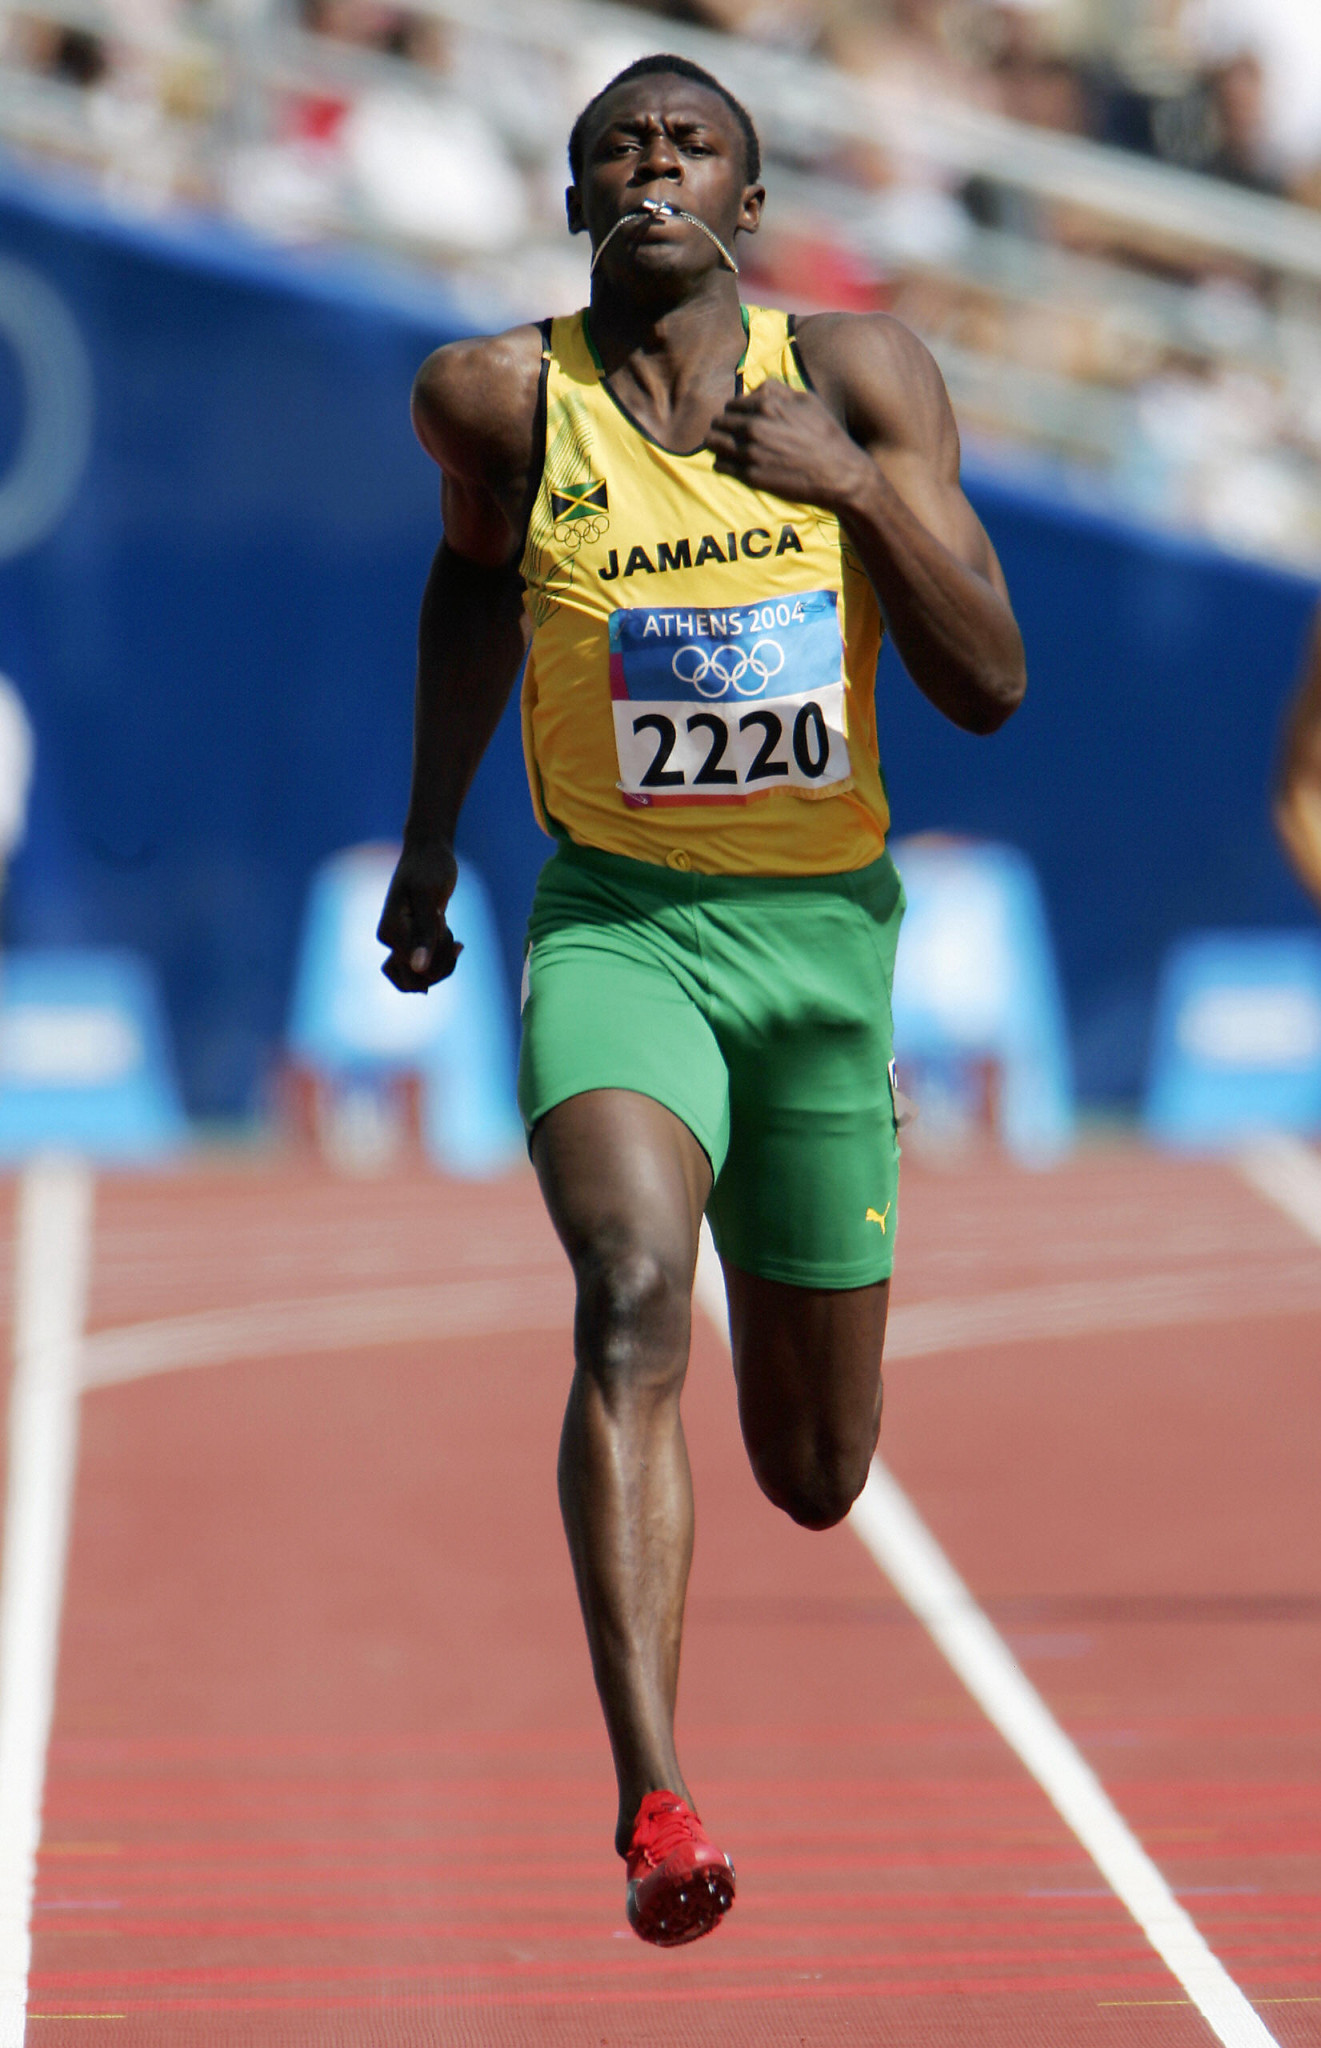 Usain Bolt competing at the Athens Olympics in 2004, the year he won a second Austin Sealy Award at the CARIFTA Games for becoming the first under-20 athlete to better 20sec for the 200m, running 19.93sec ©Getty Images